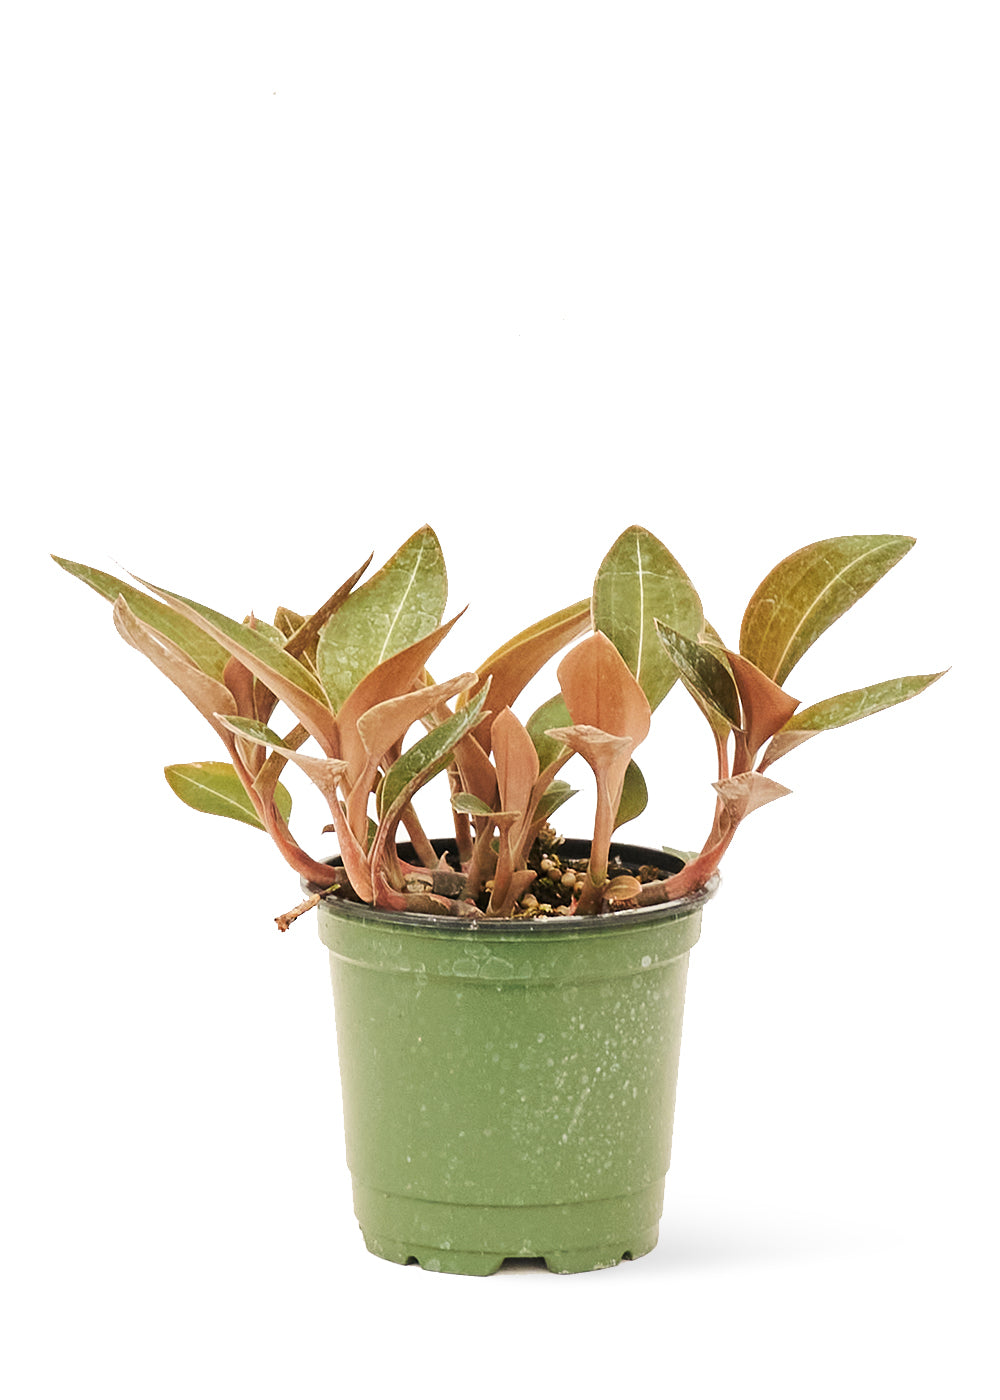 Small size Jewel Orchid 'Discolor' Plant in a growers pot with a white background